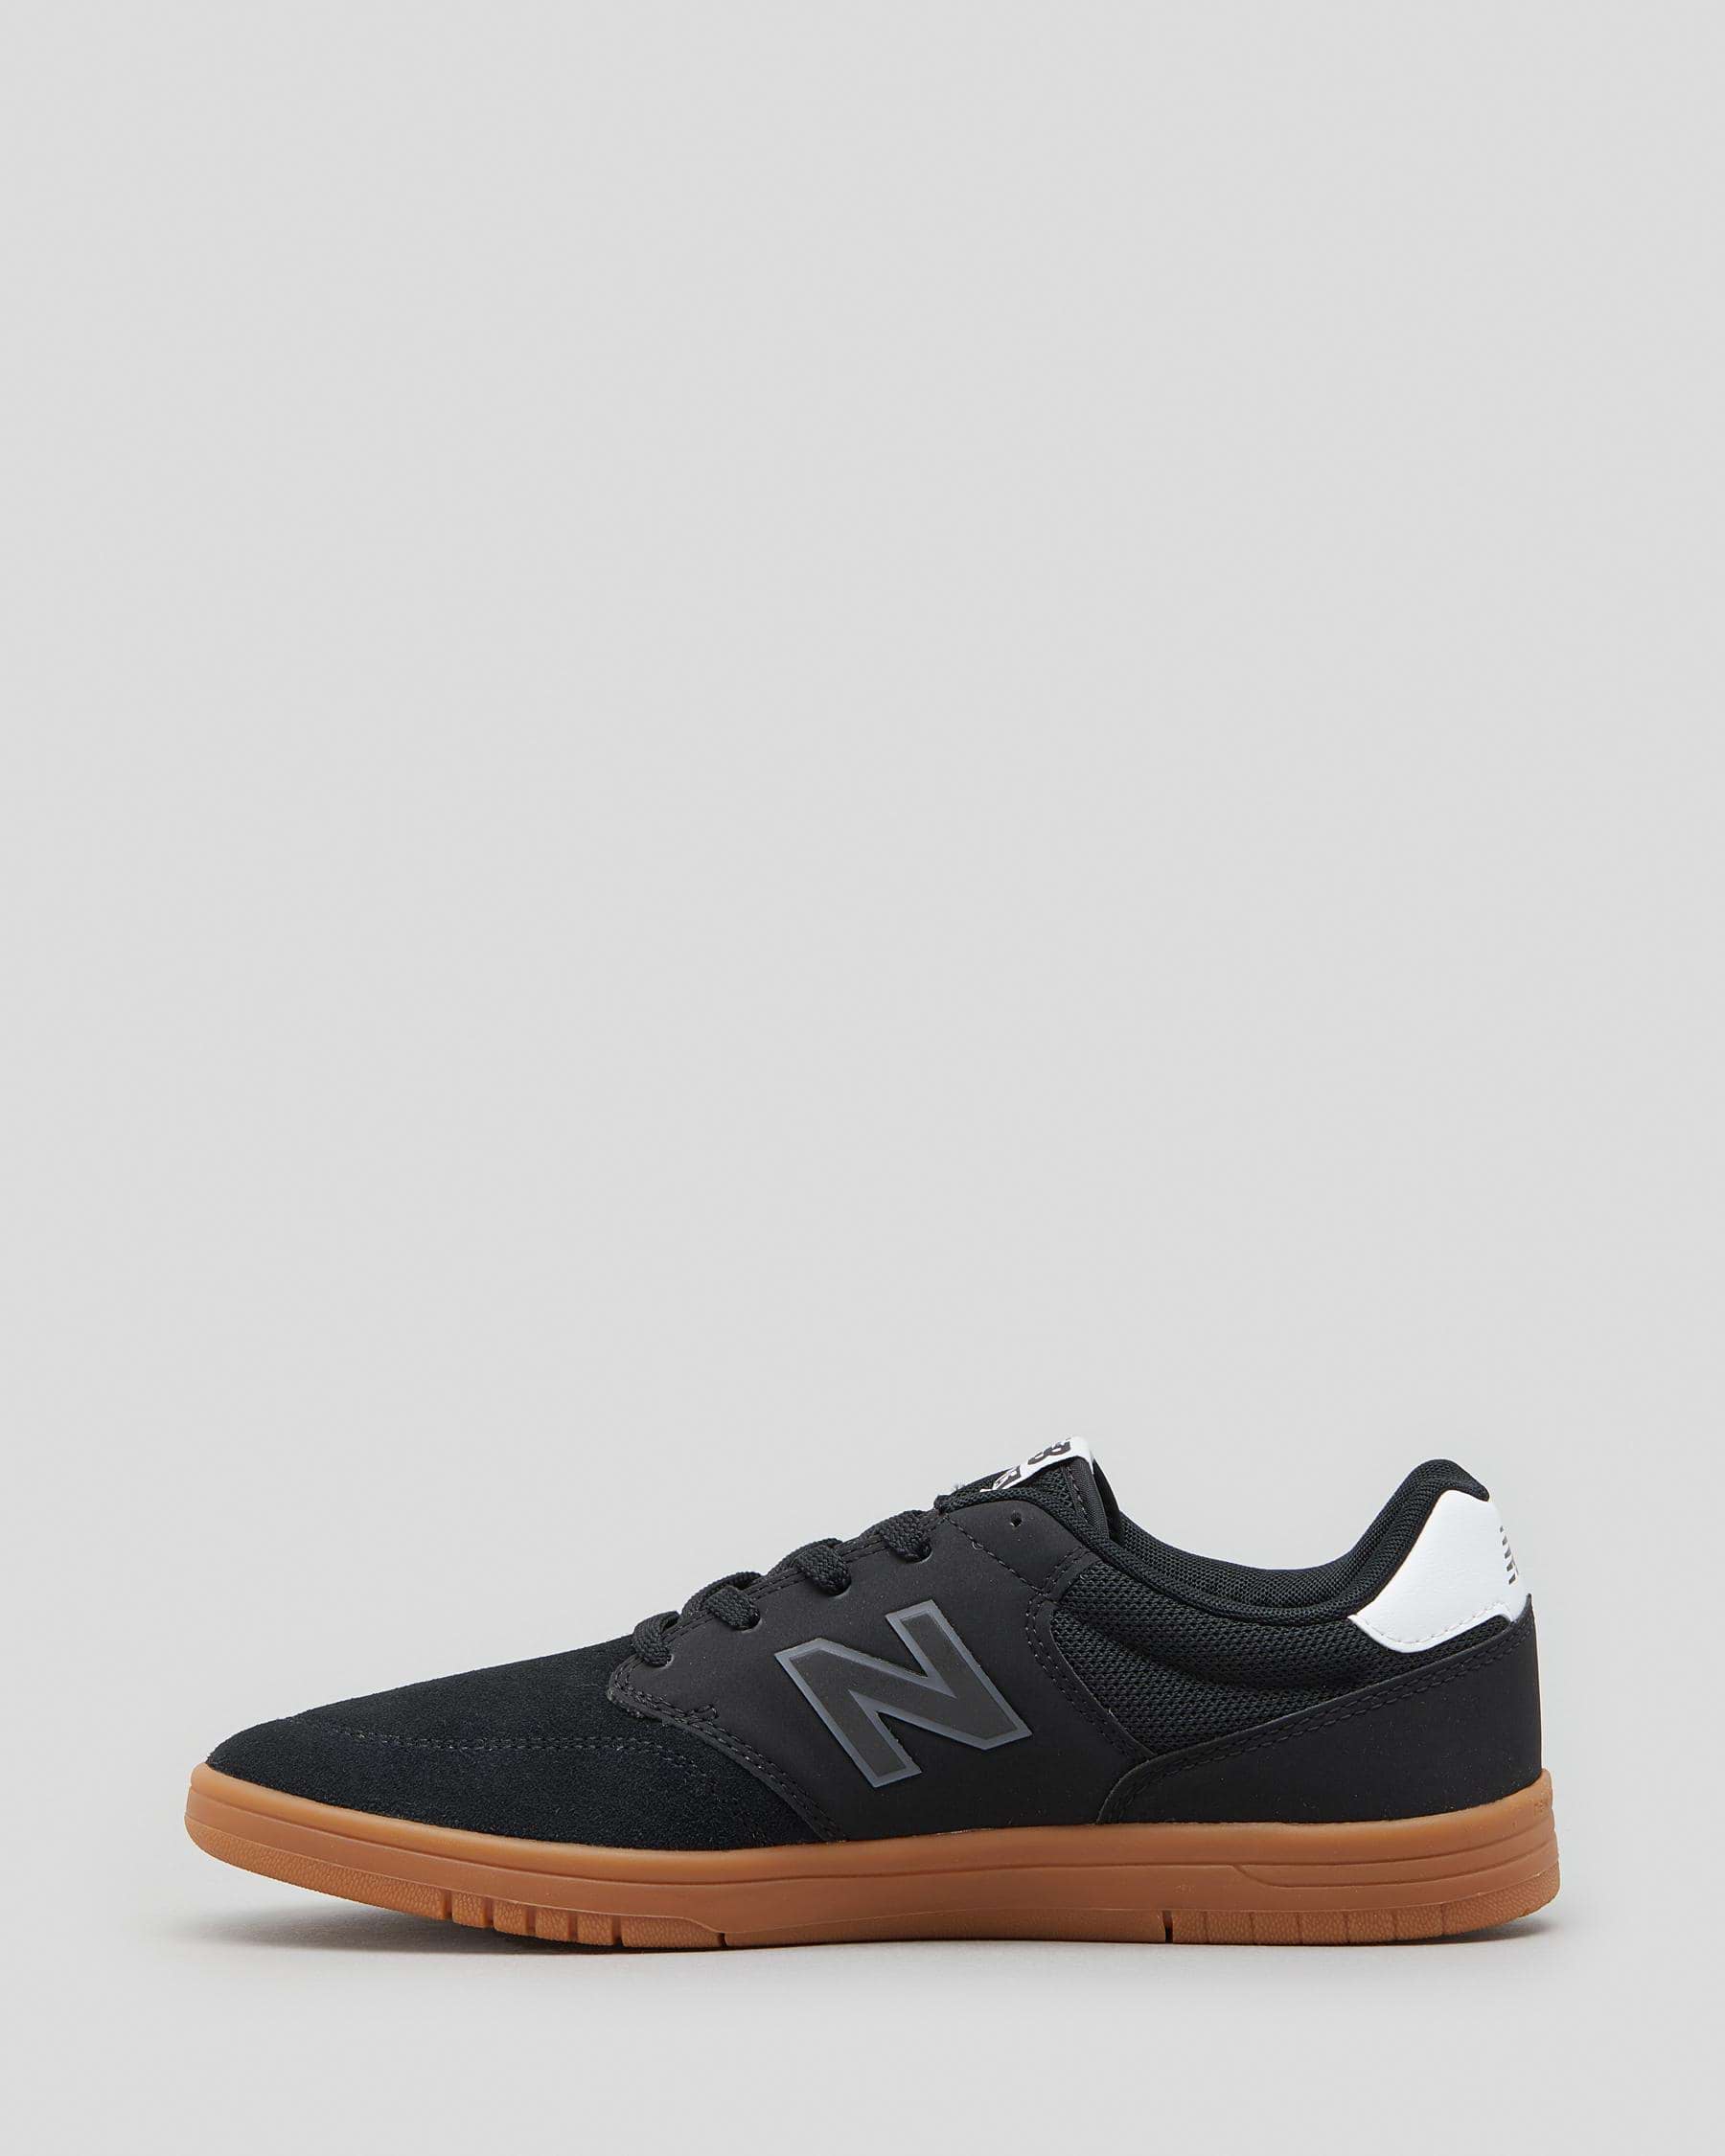 New Balance NB 425 Shoes In Black/gum - FREE* Shipping & Easy Returns ...